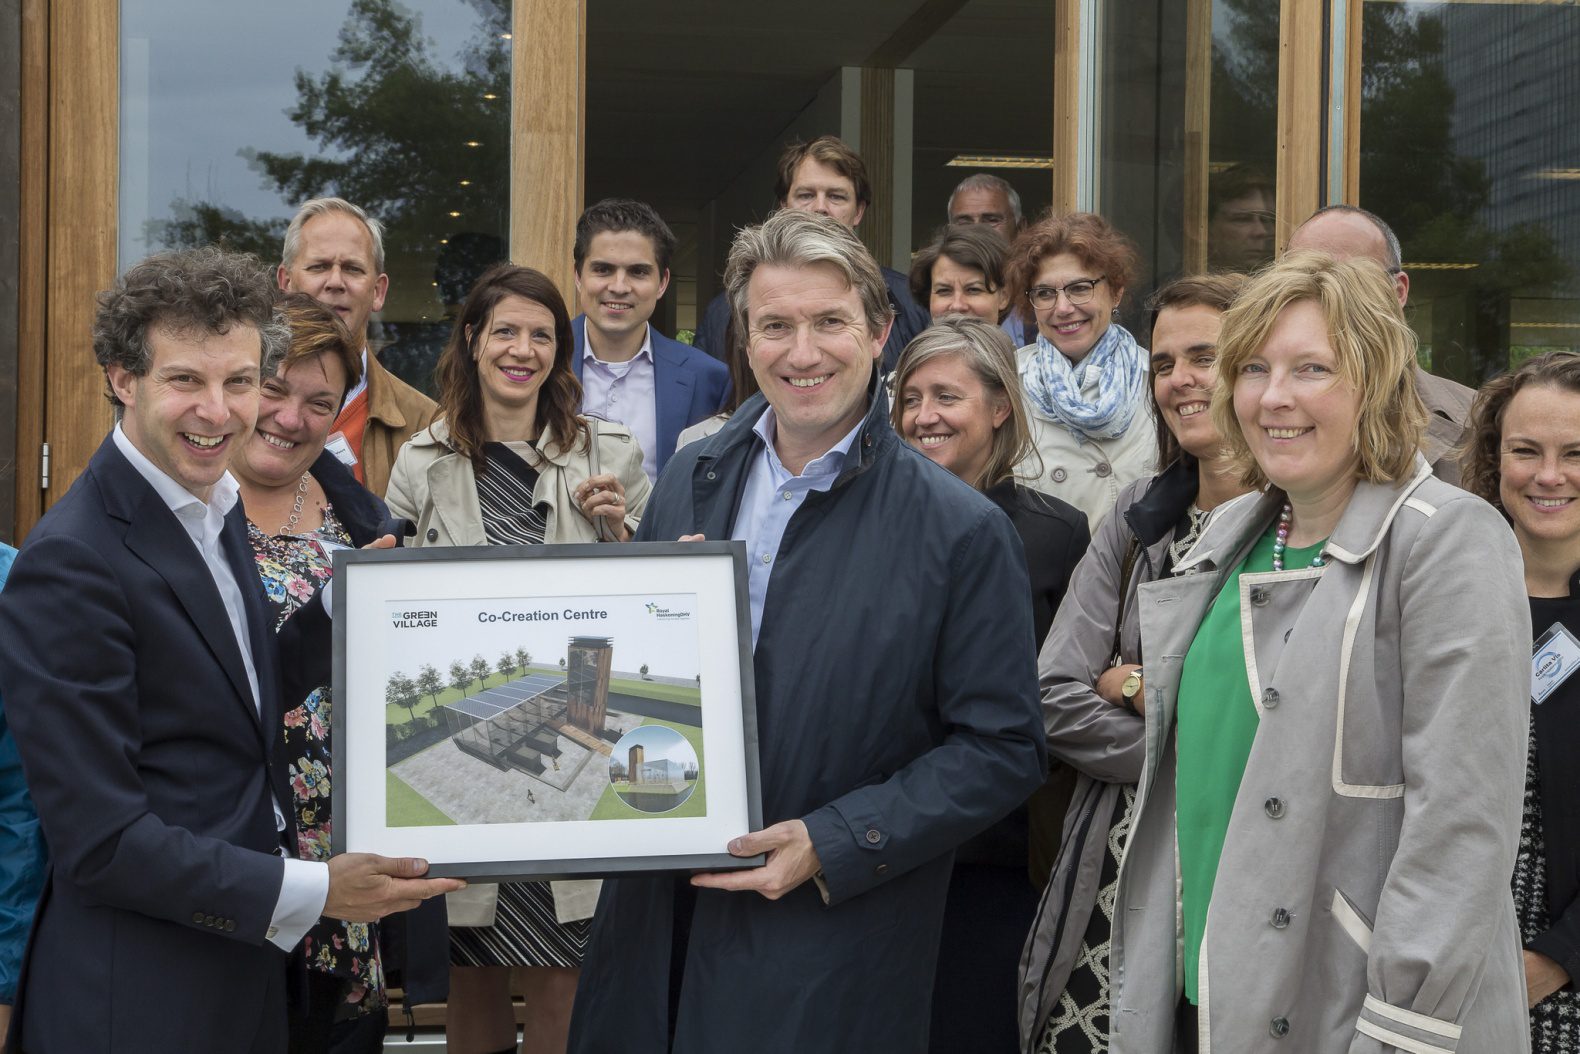 Royal Haskoning DHV partners with The Green Village